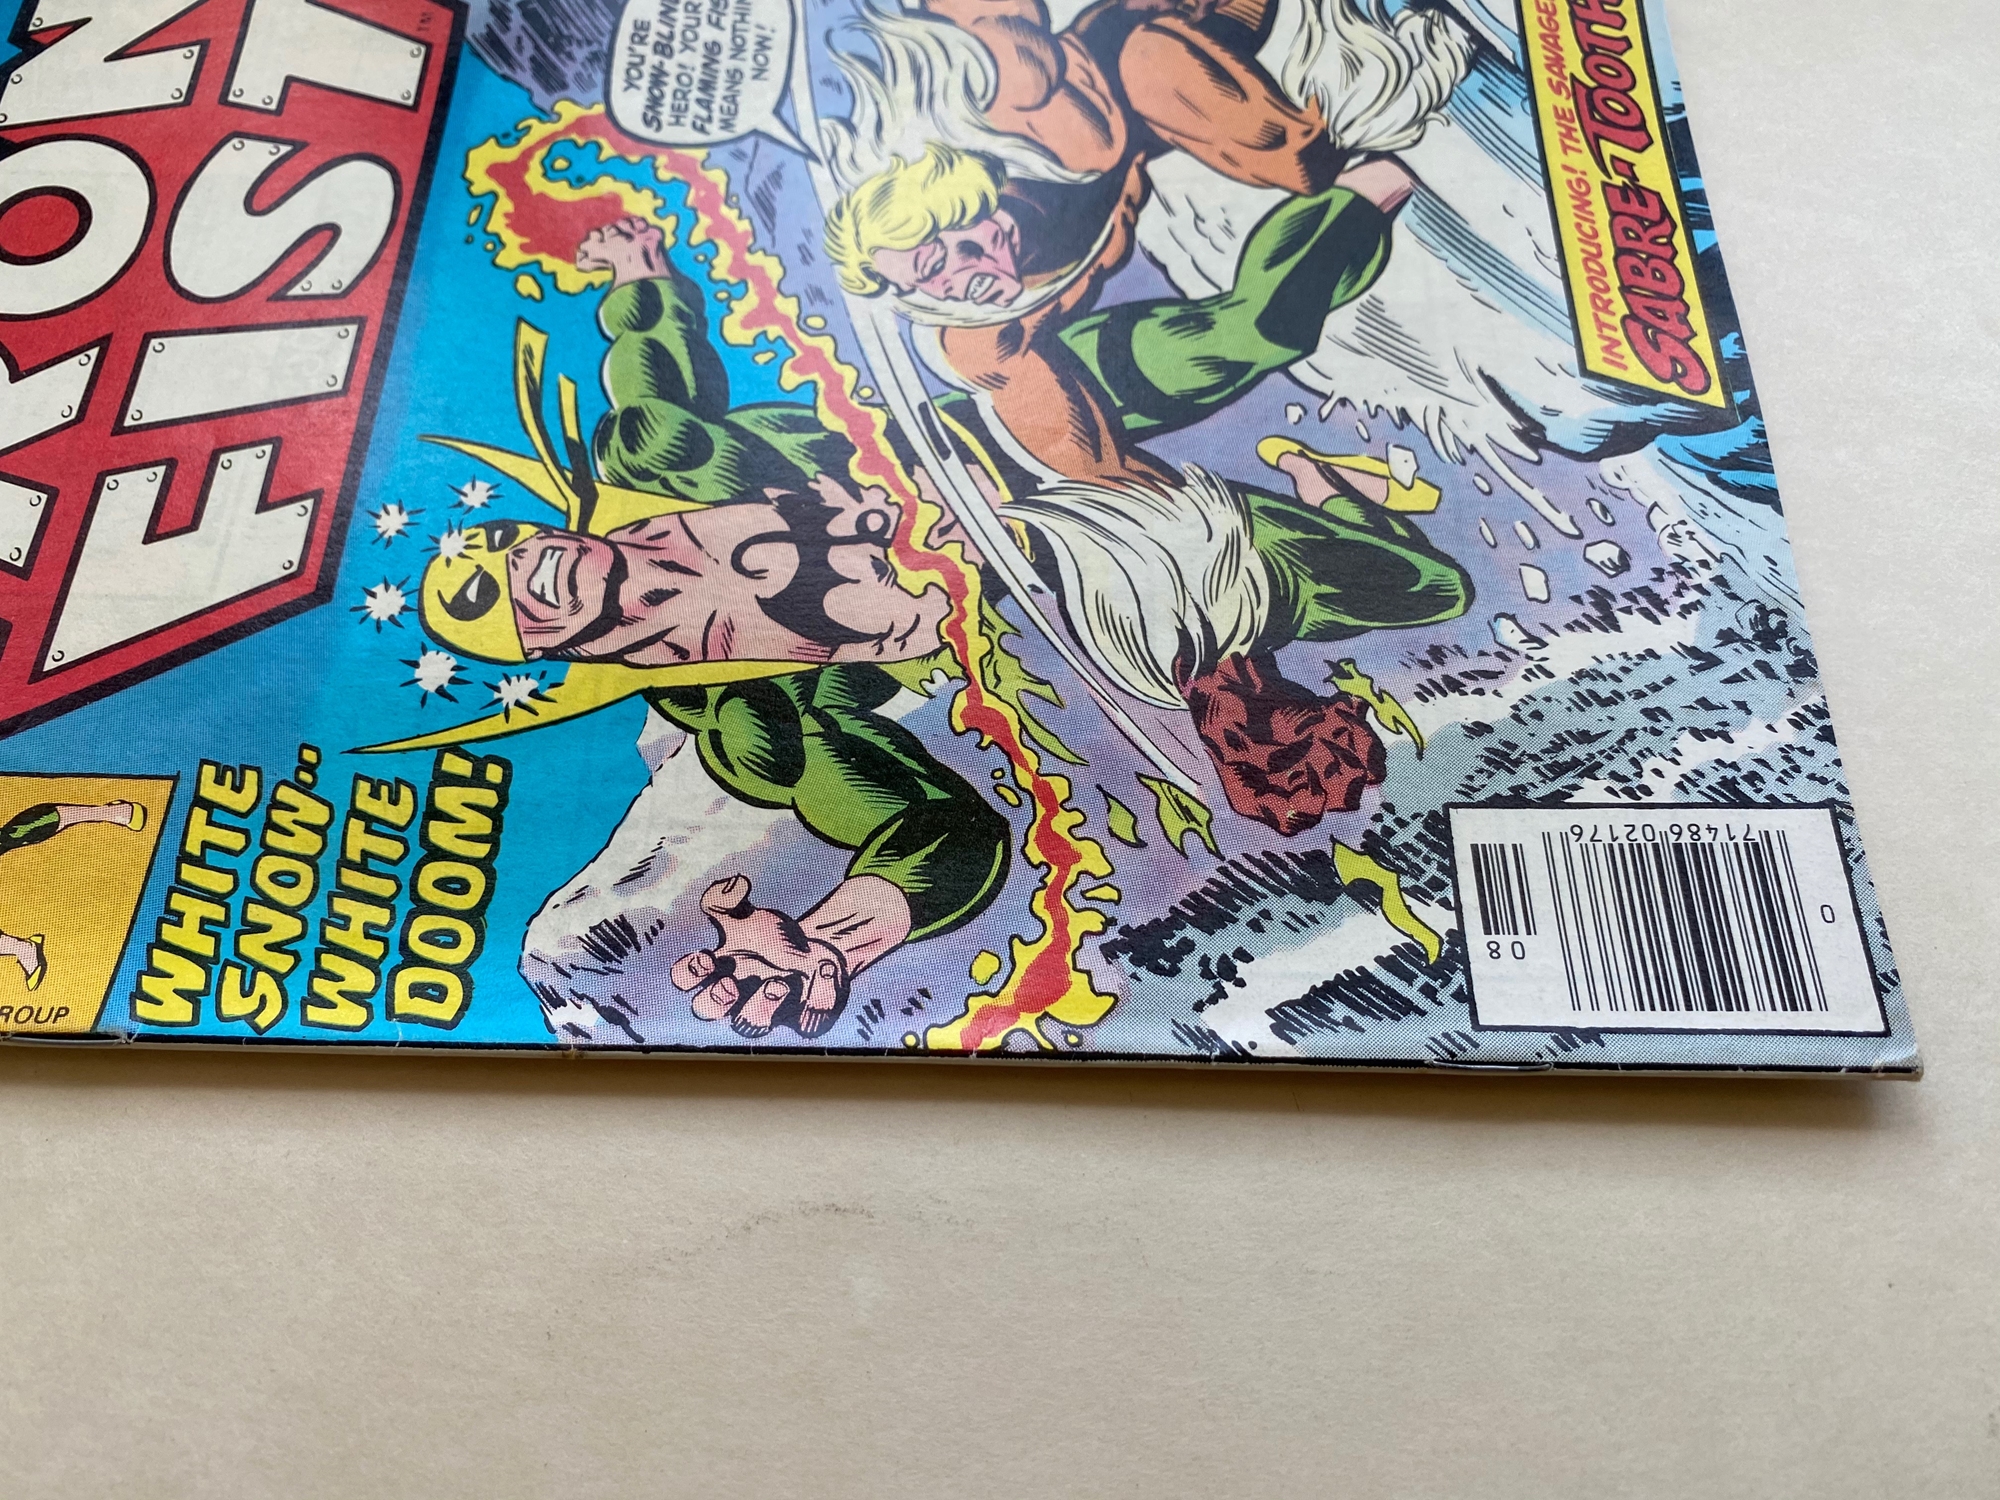 IRON FIST #14 - (1976 - MARVEL - CENTS Copy) - First appearance of Sabretooth - Al Milgrom cover - Image 2 of 9